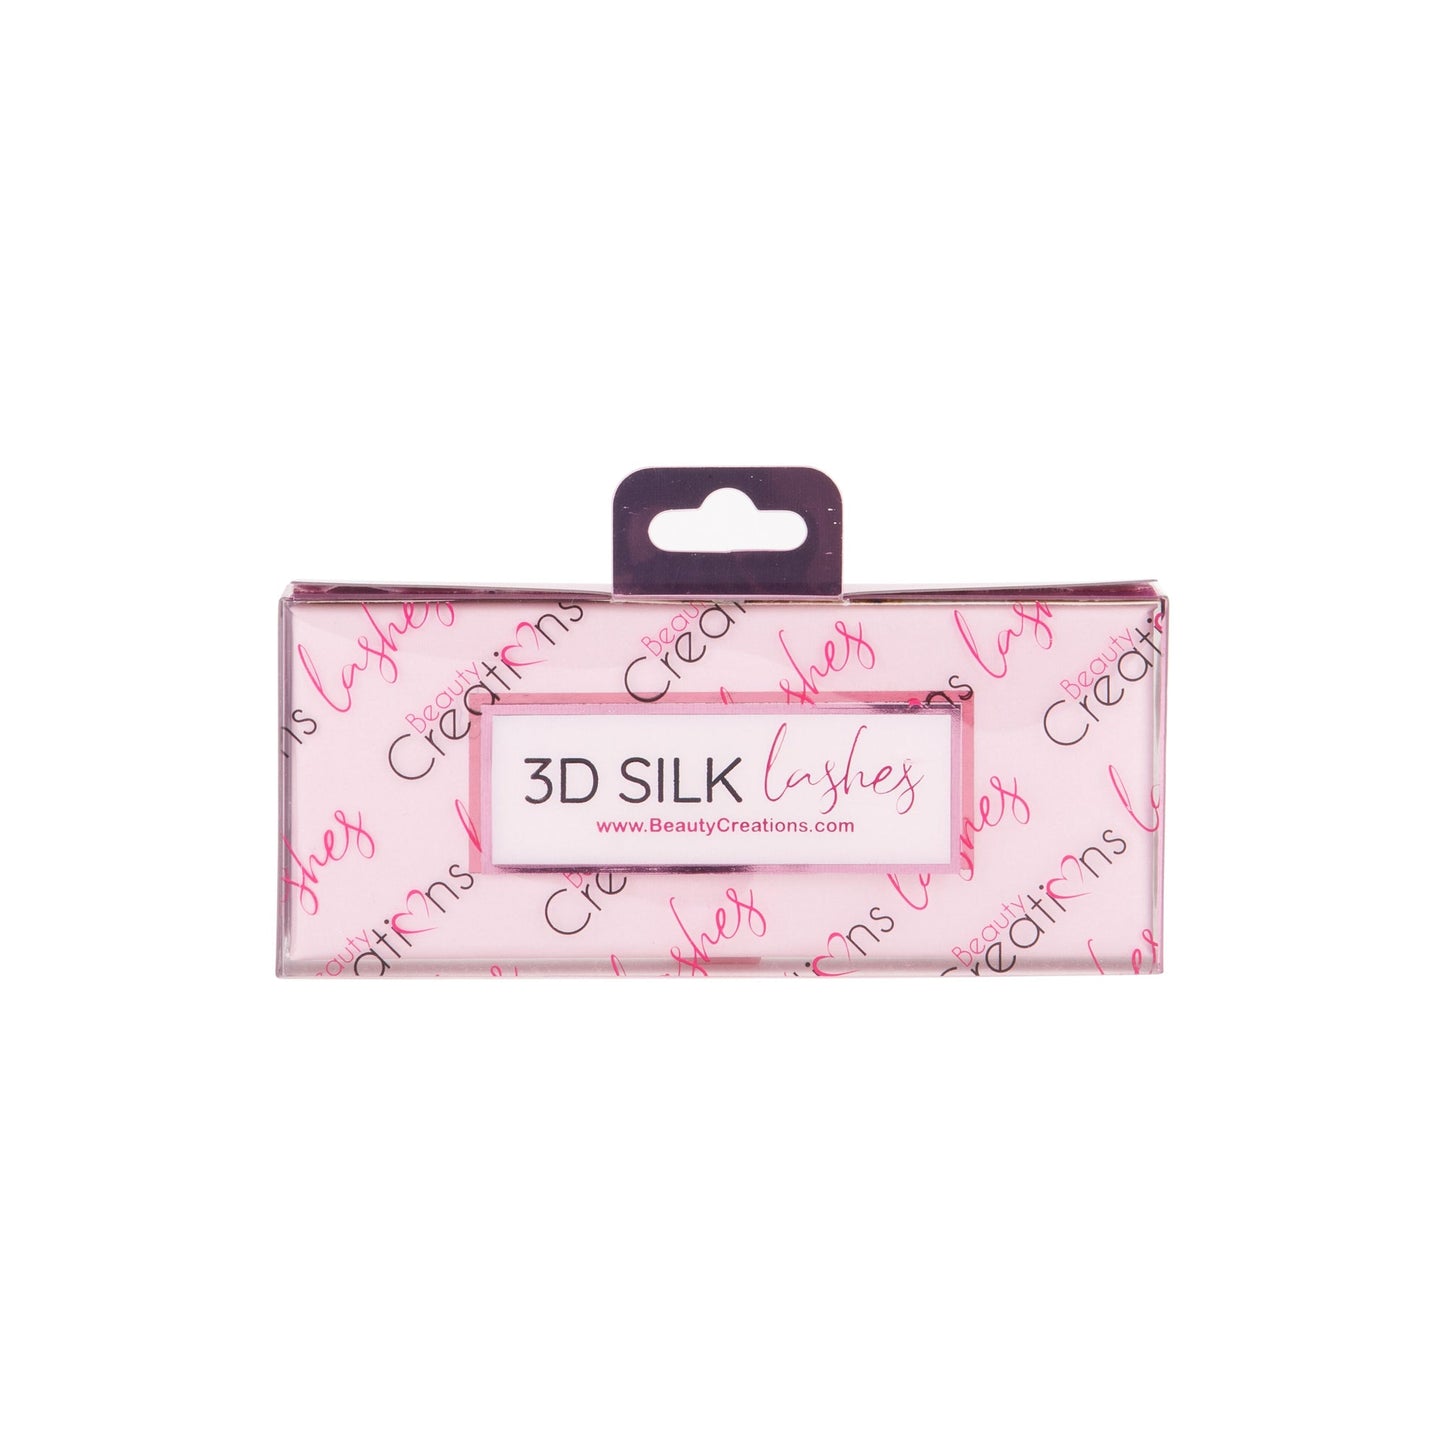 Something Casual - 3D Silk Lashes